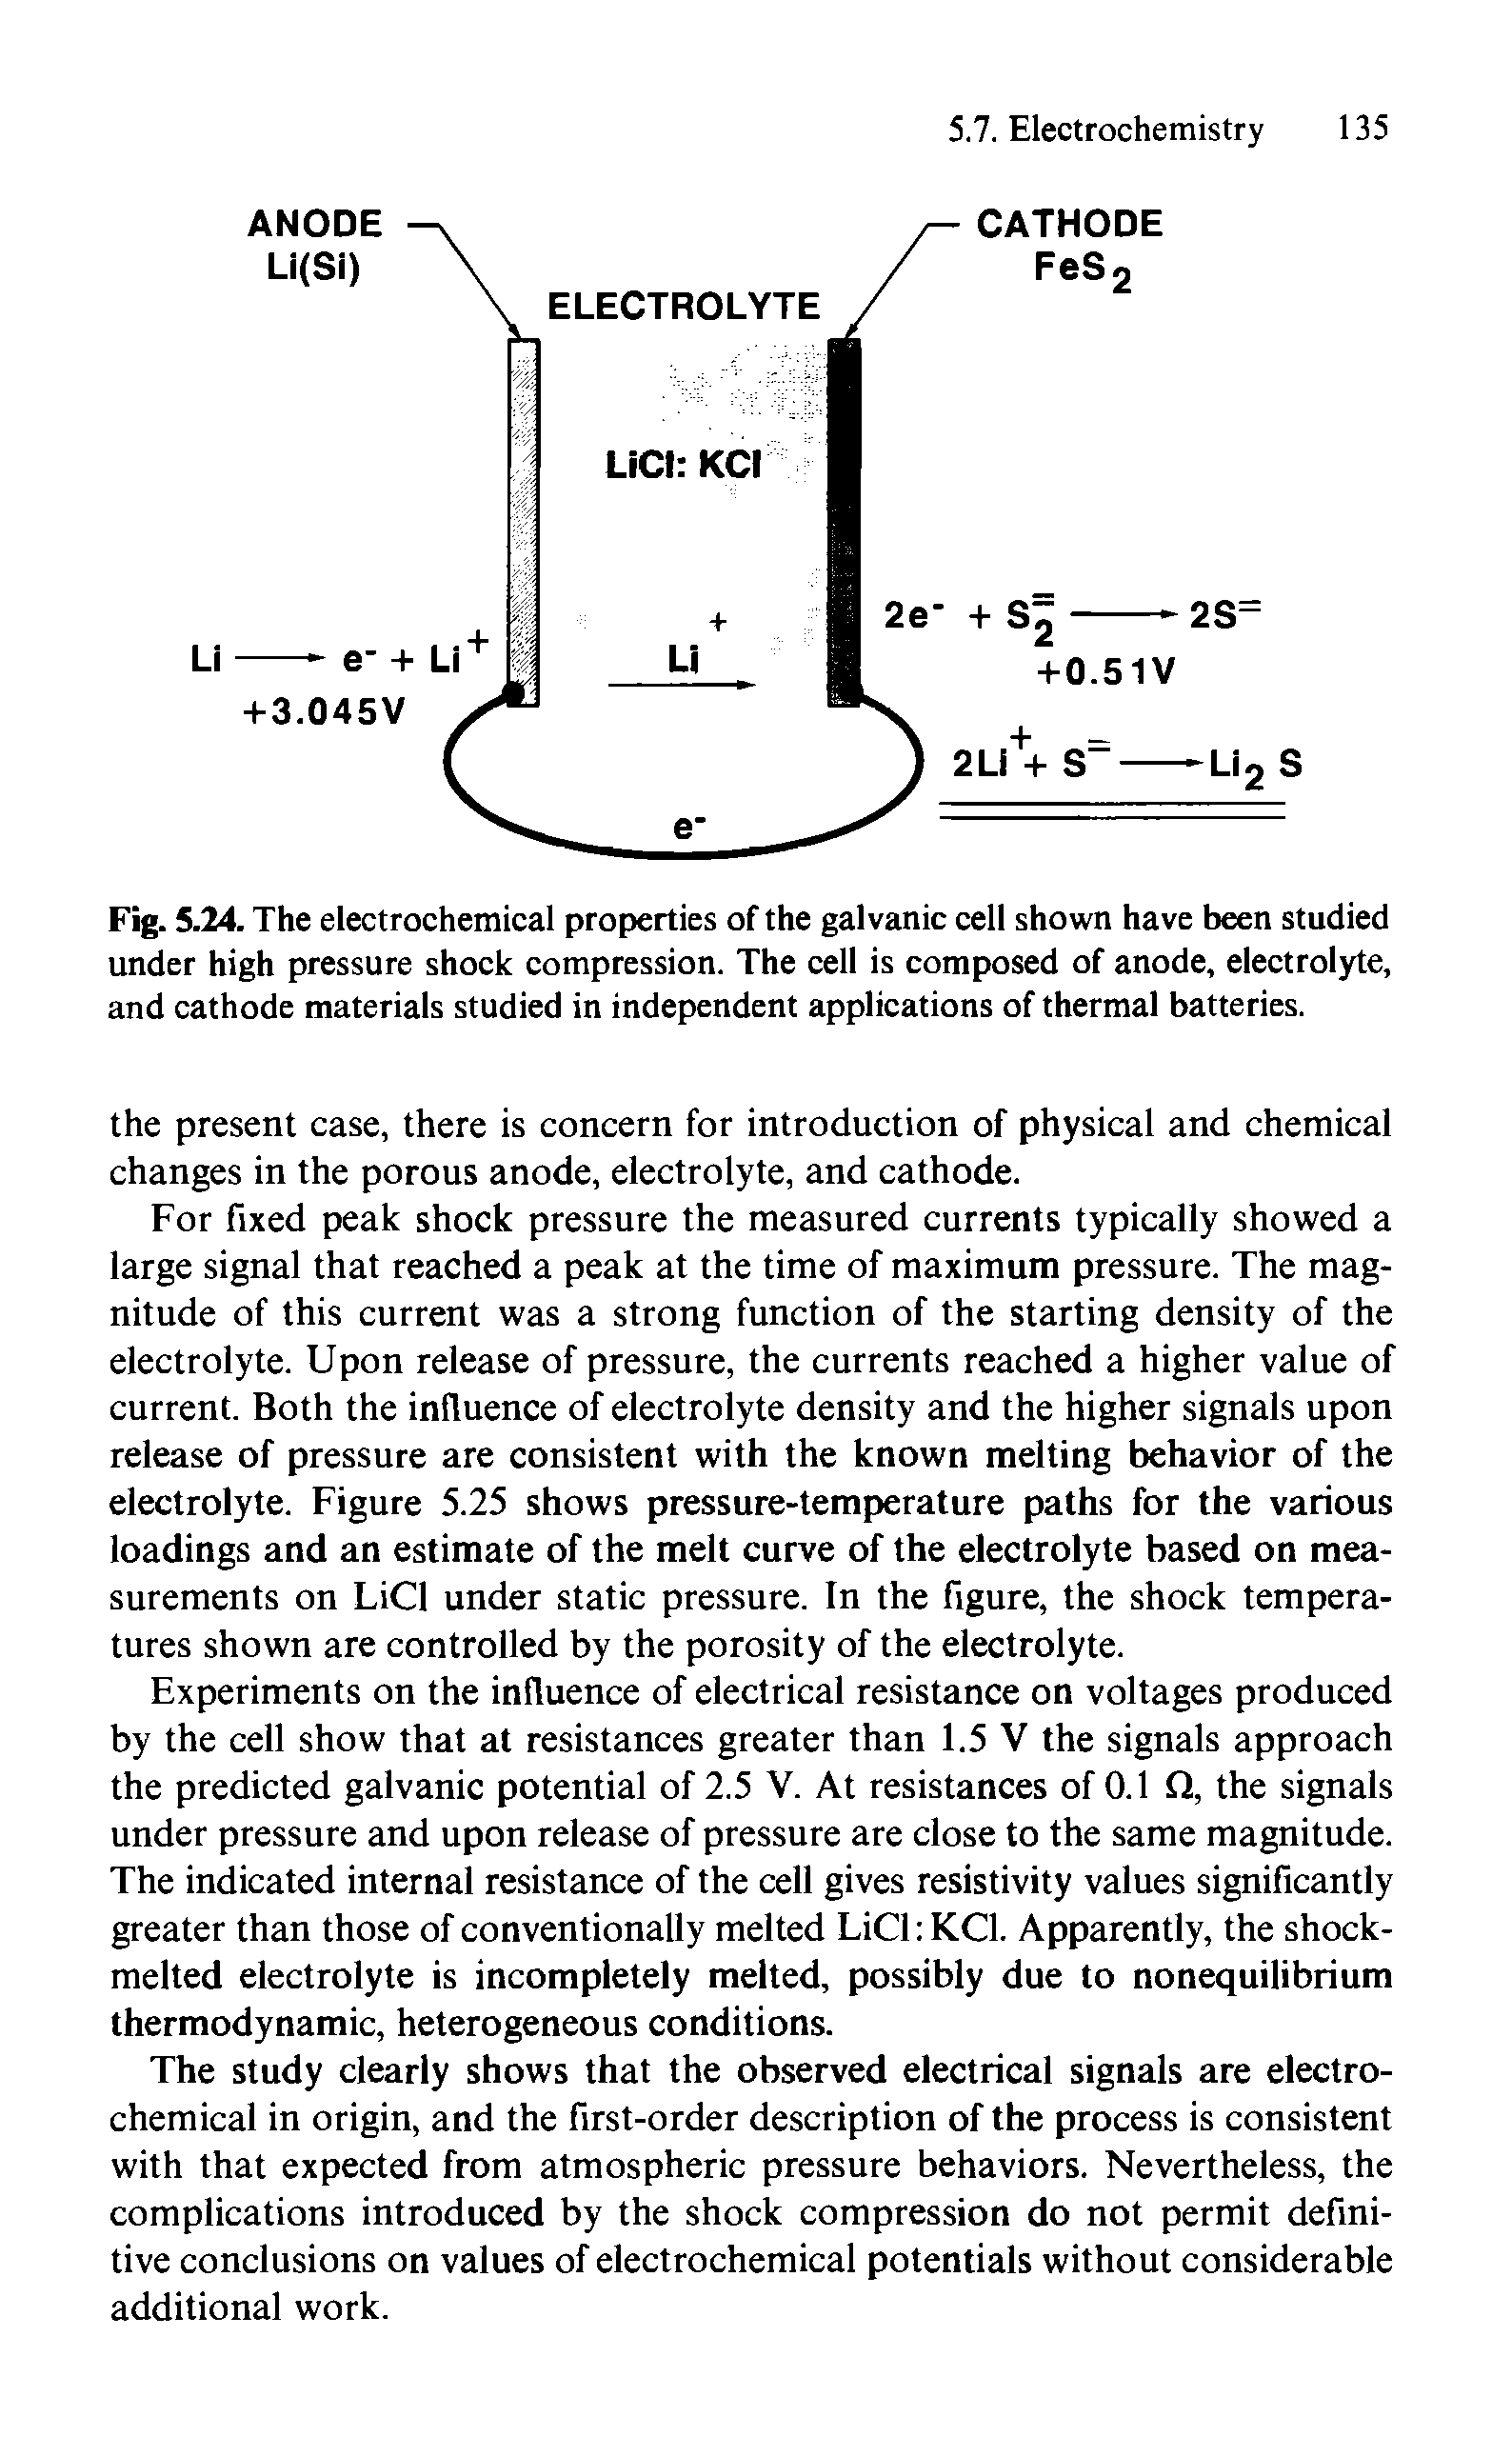 Fig. 5.24. The electrochemical properties of the galvanic cell shown have been studied under high pressure shock compression. The cell is composed of anode, electrolyte, and cathode materials studied in independent applications of thermal batteries.